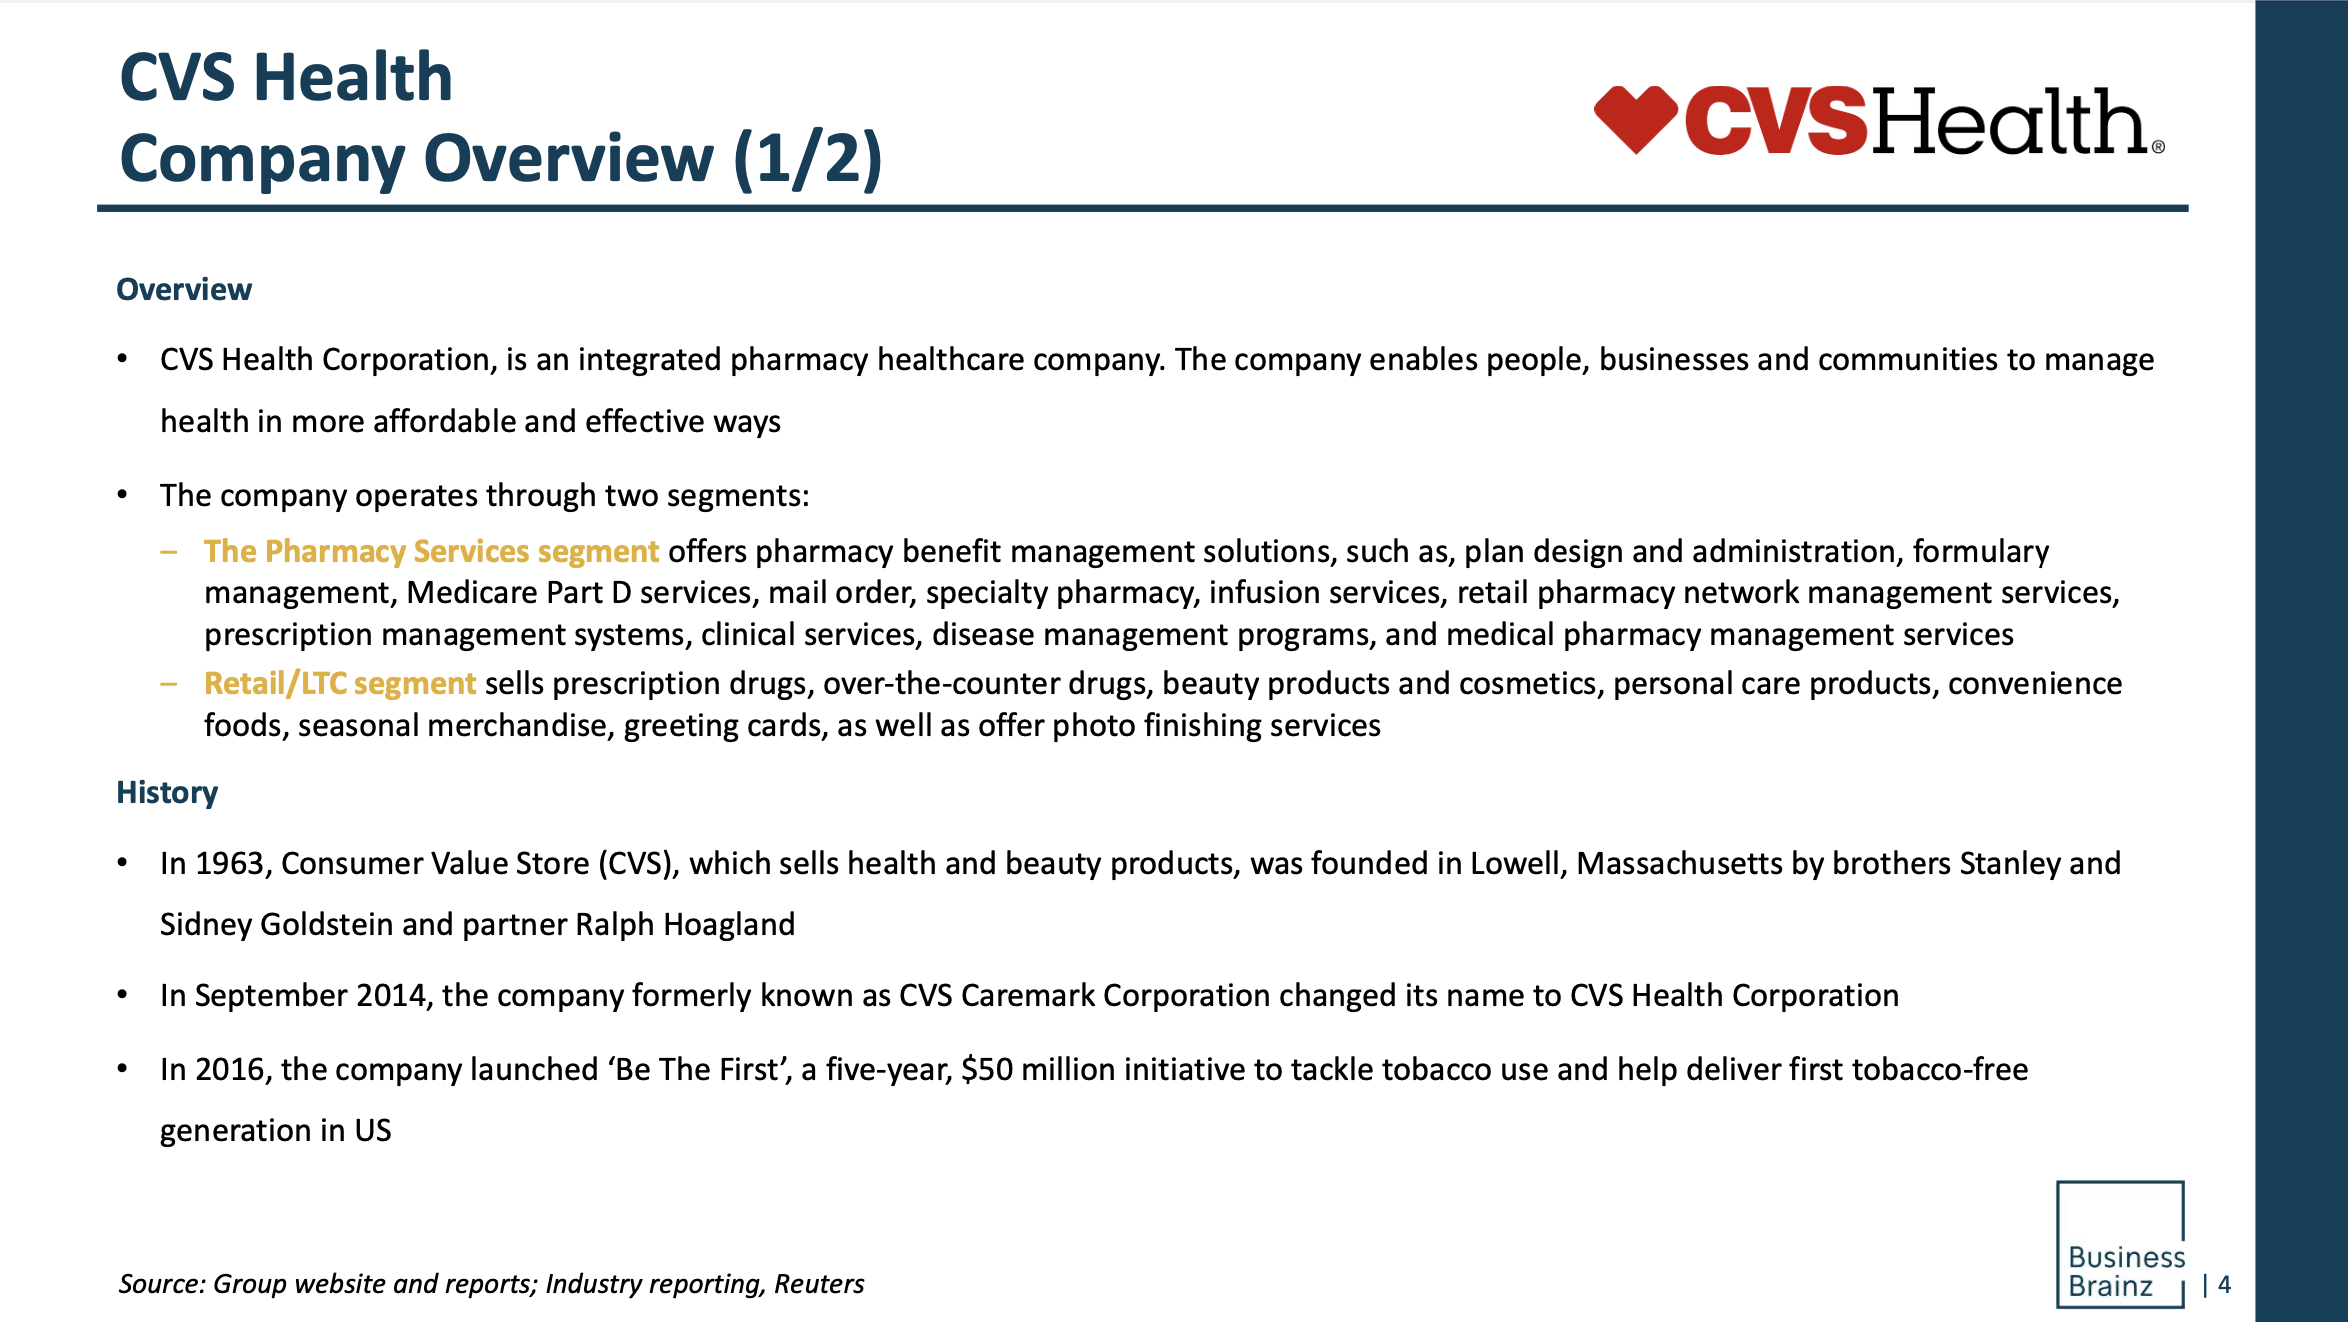 Overview of cvs health carefirst tchr